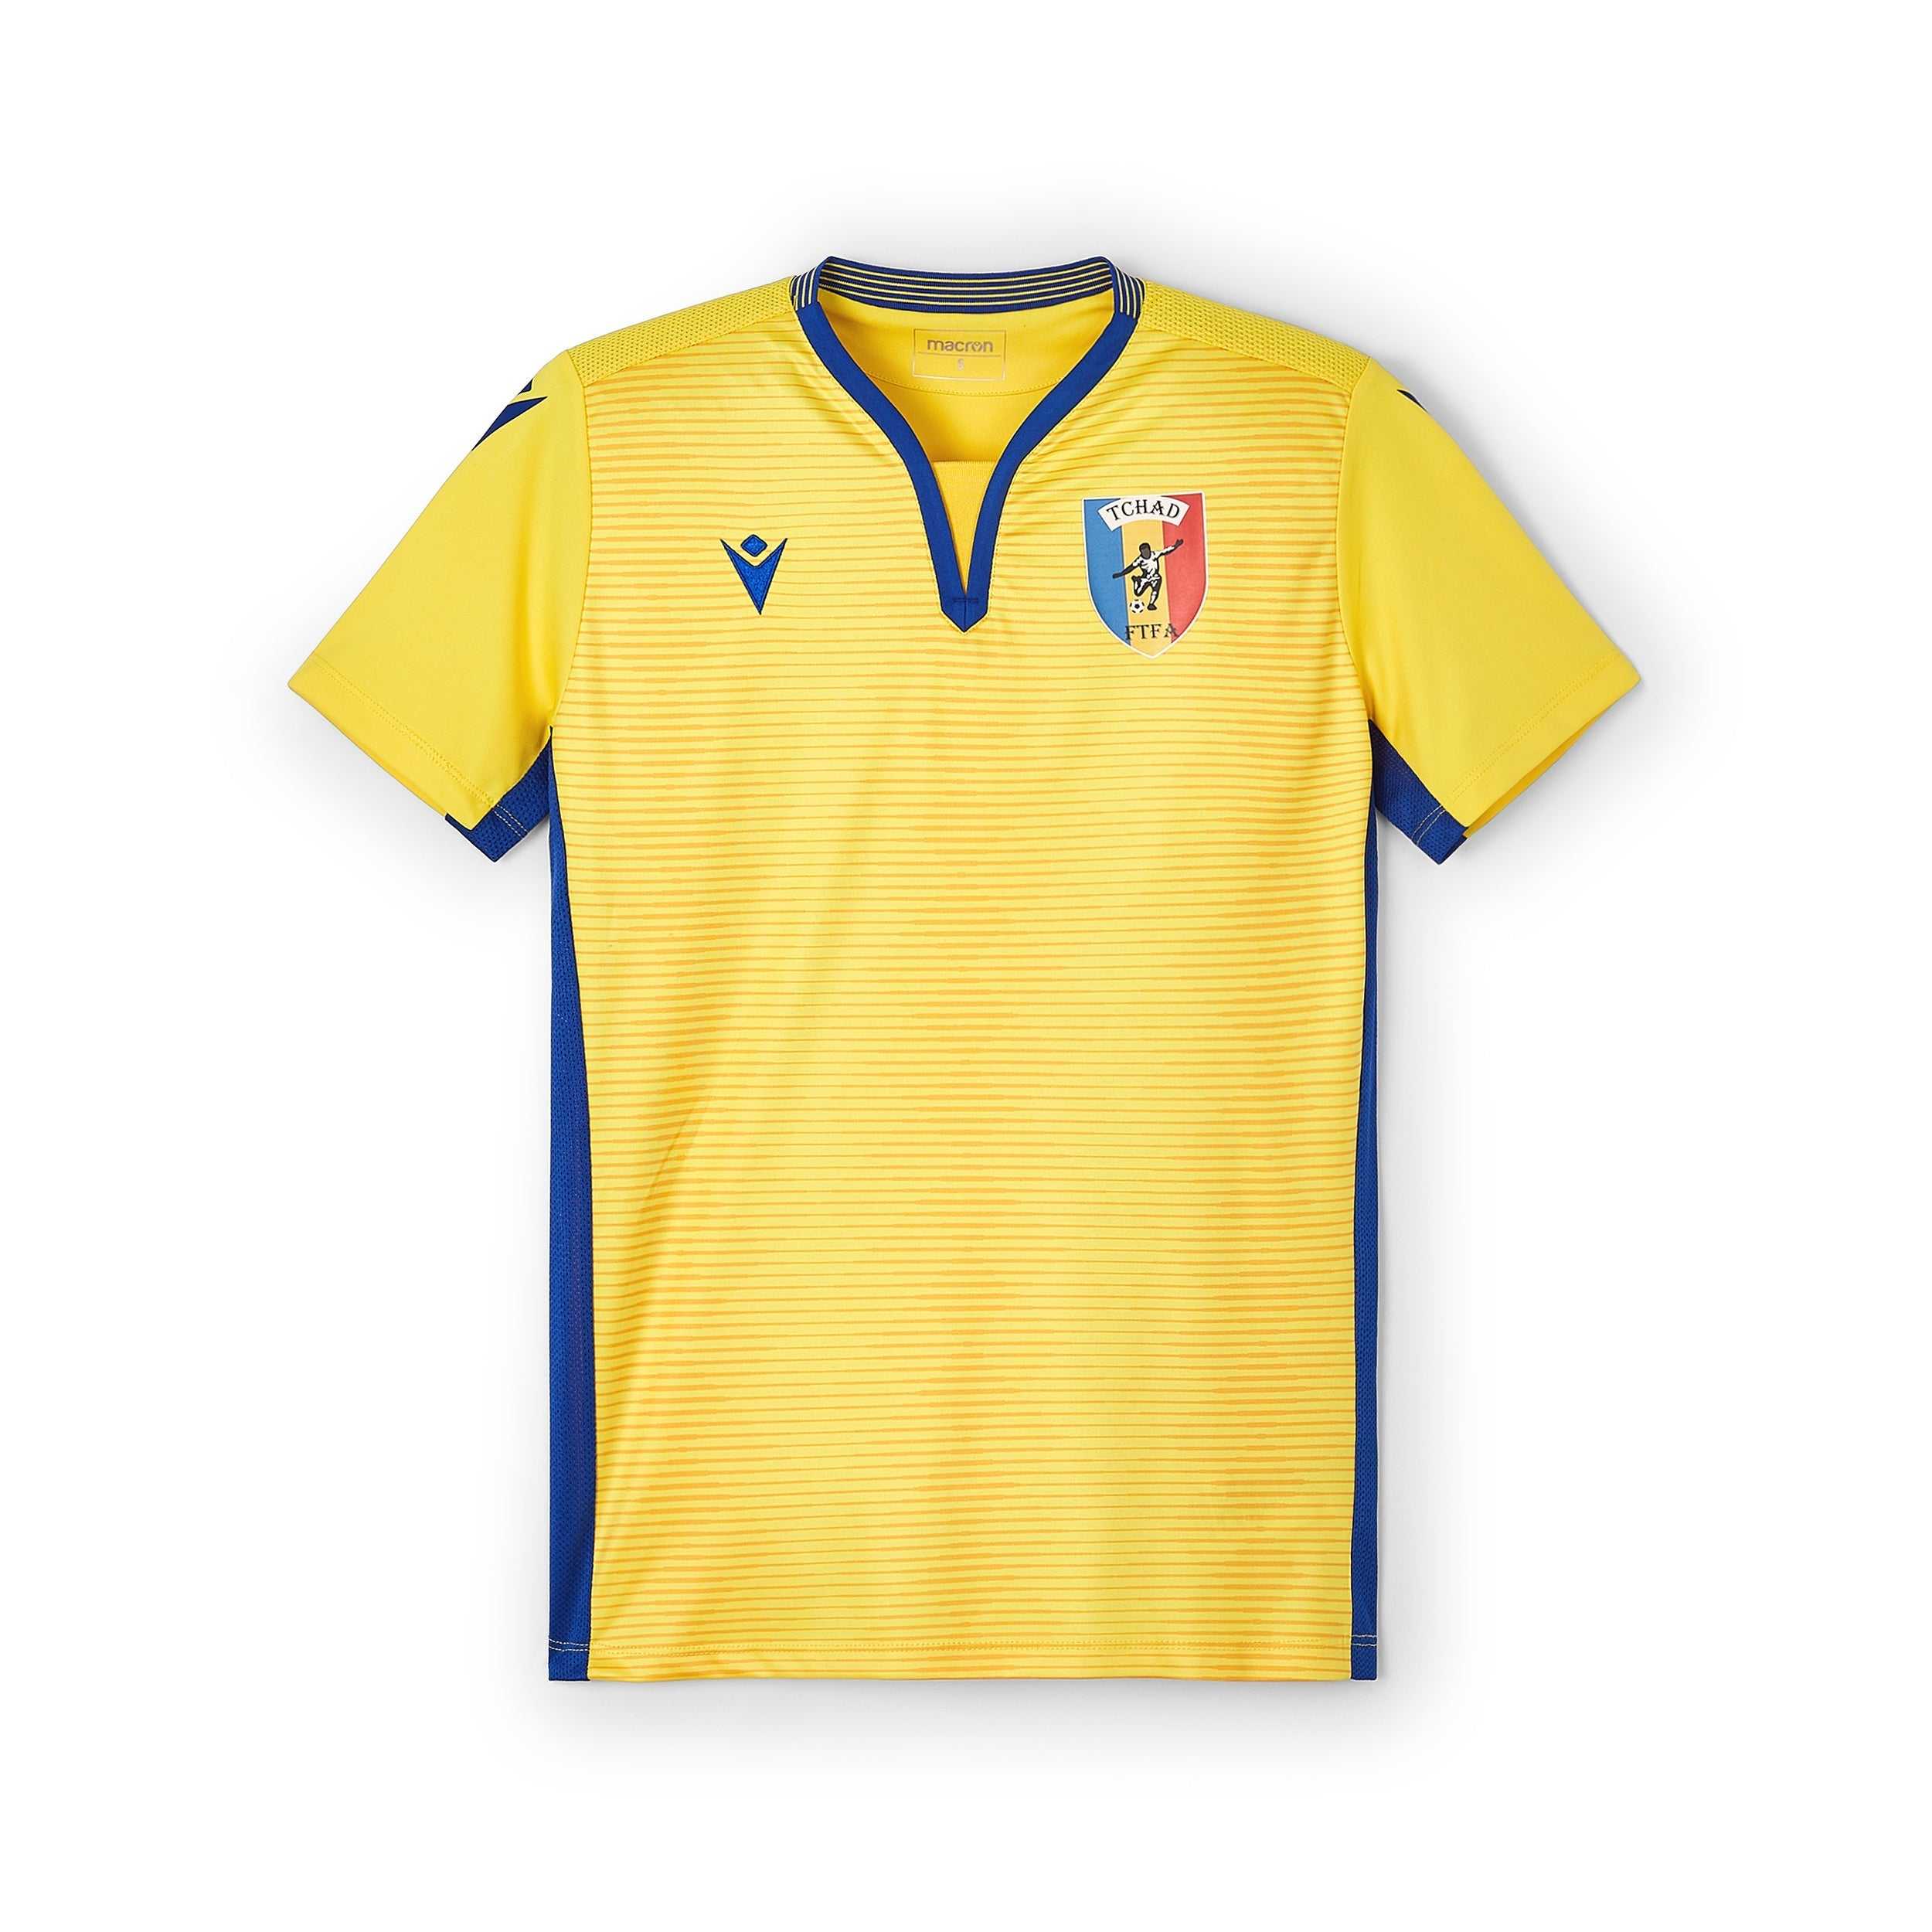 Chad Away Jersey - Mens